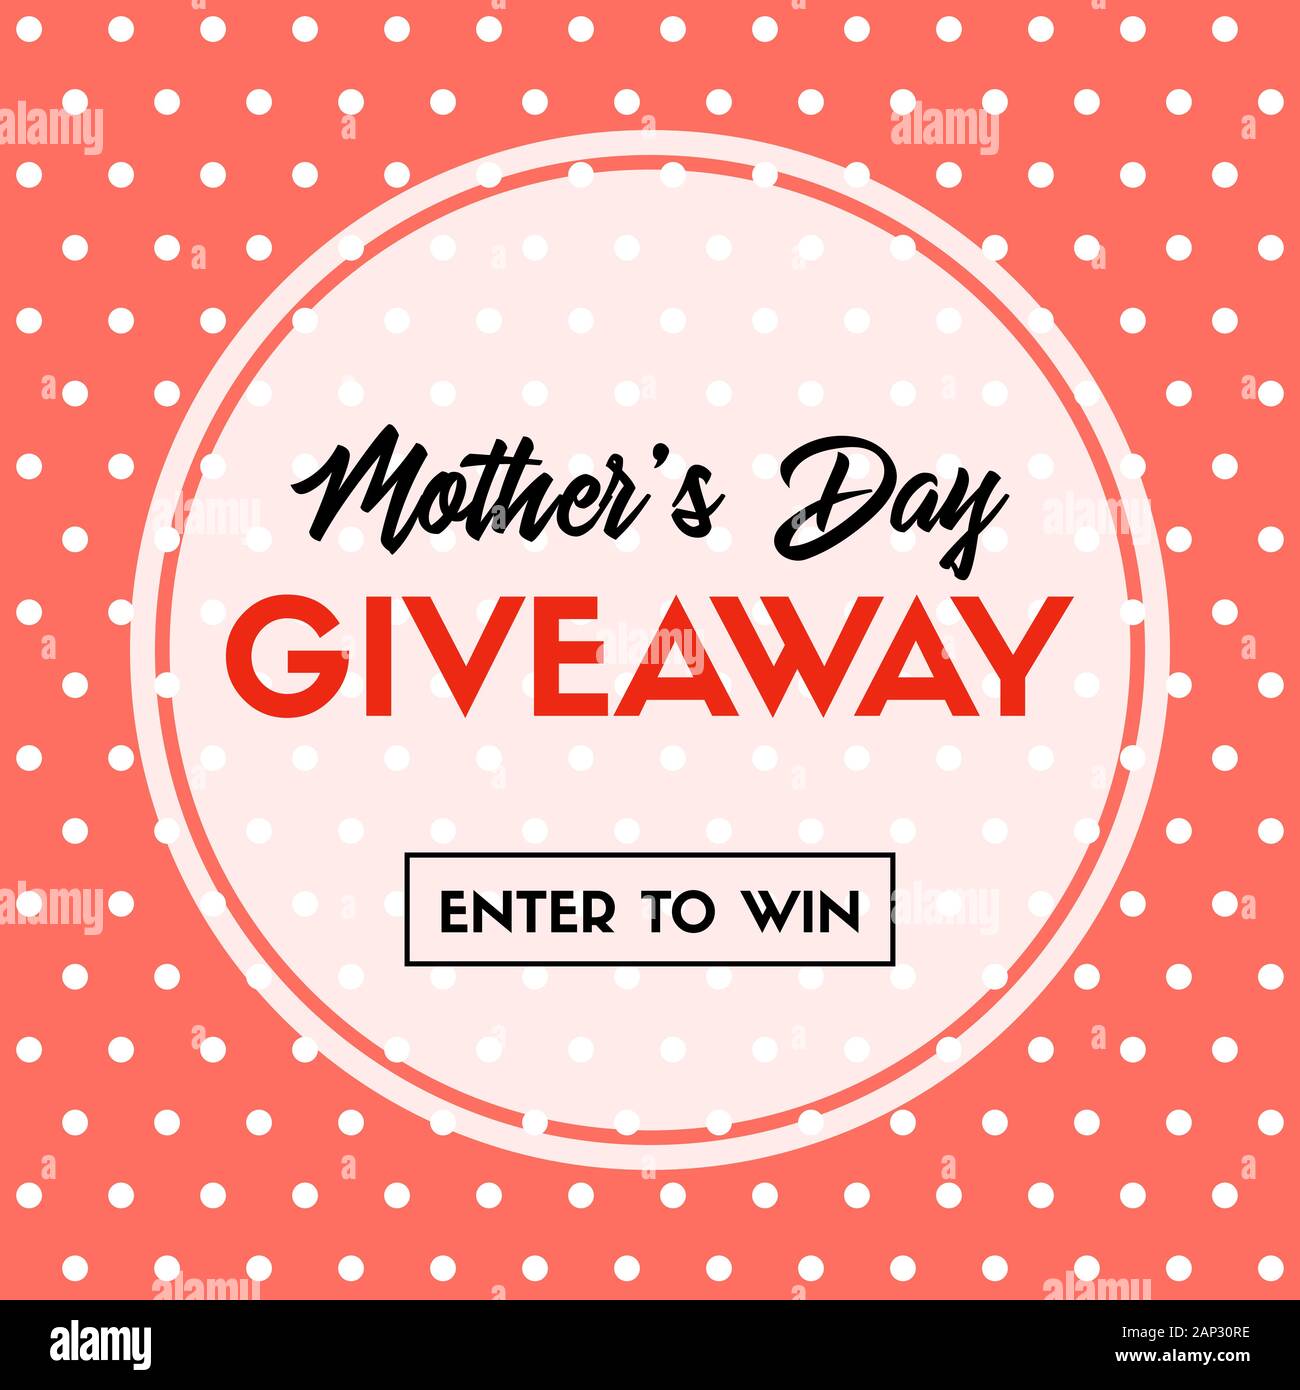 Mothers day giveaway banner. Enter to win Stock Vector